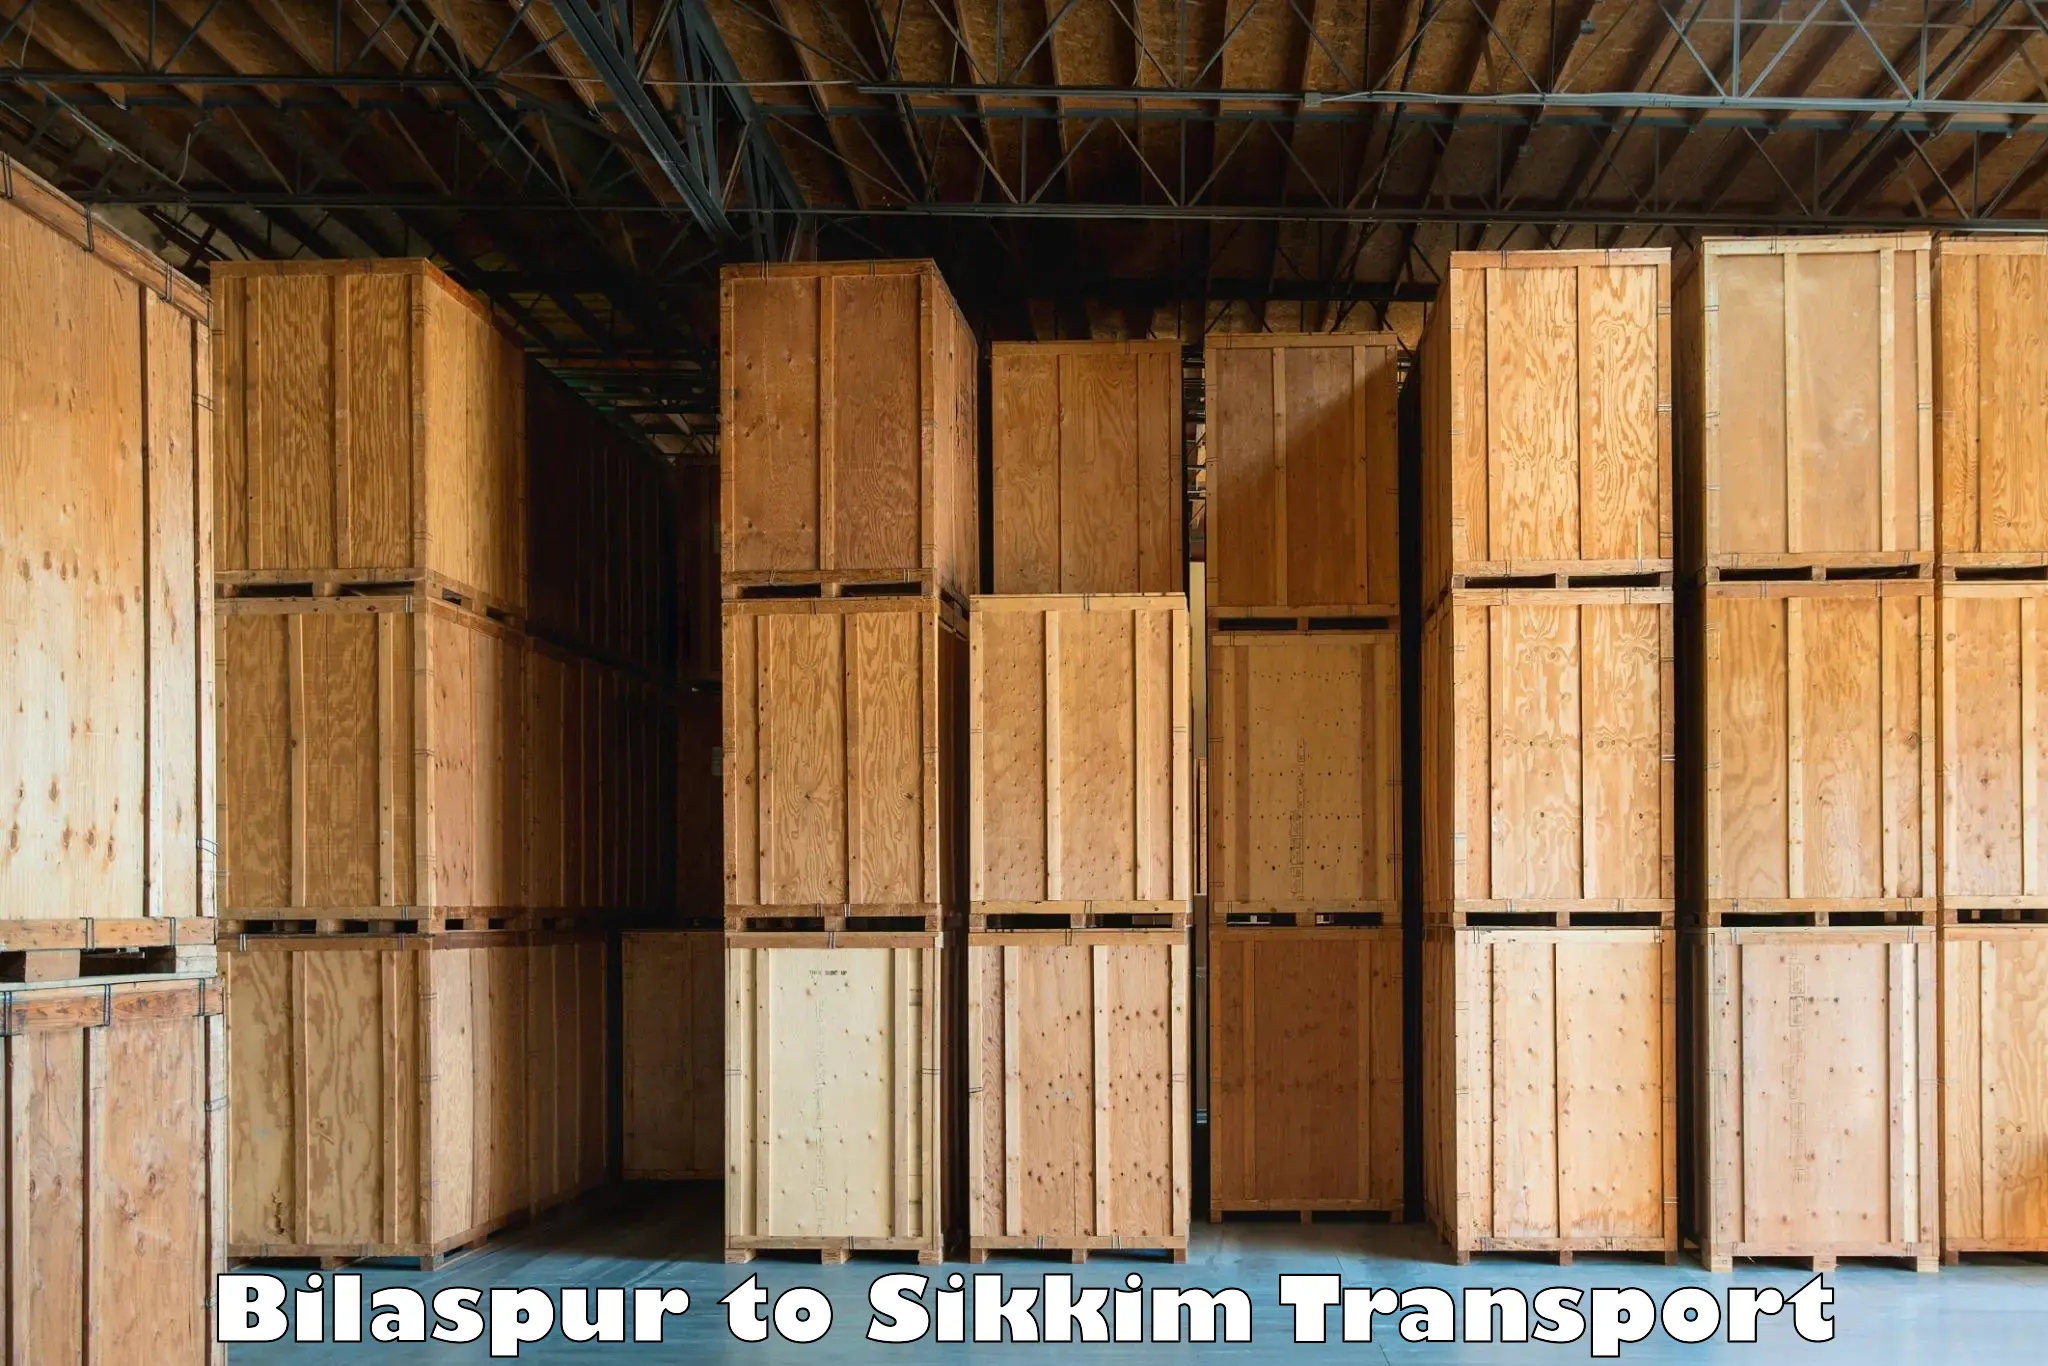 Daily parcel service transport Bilaspur to Sikkim